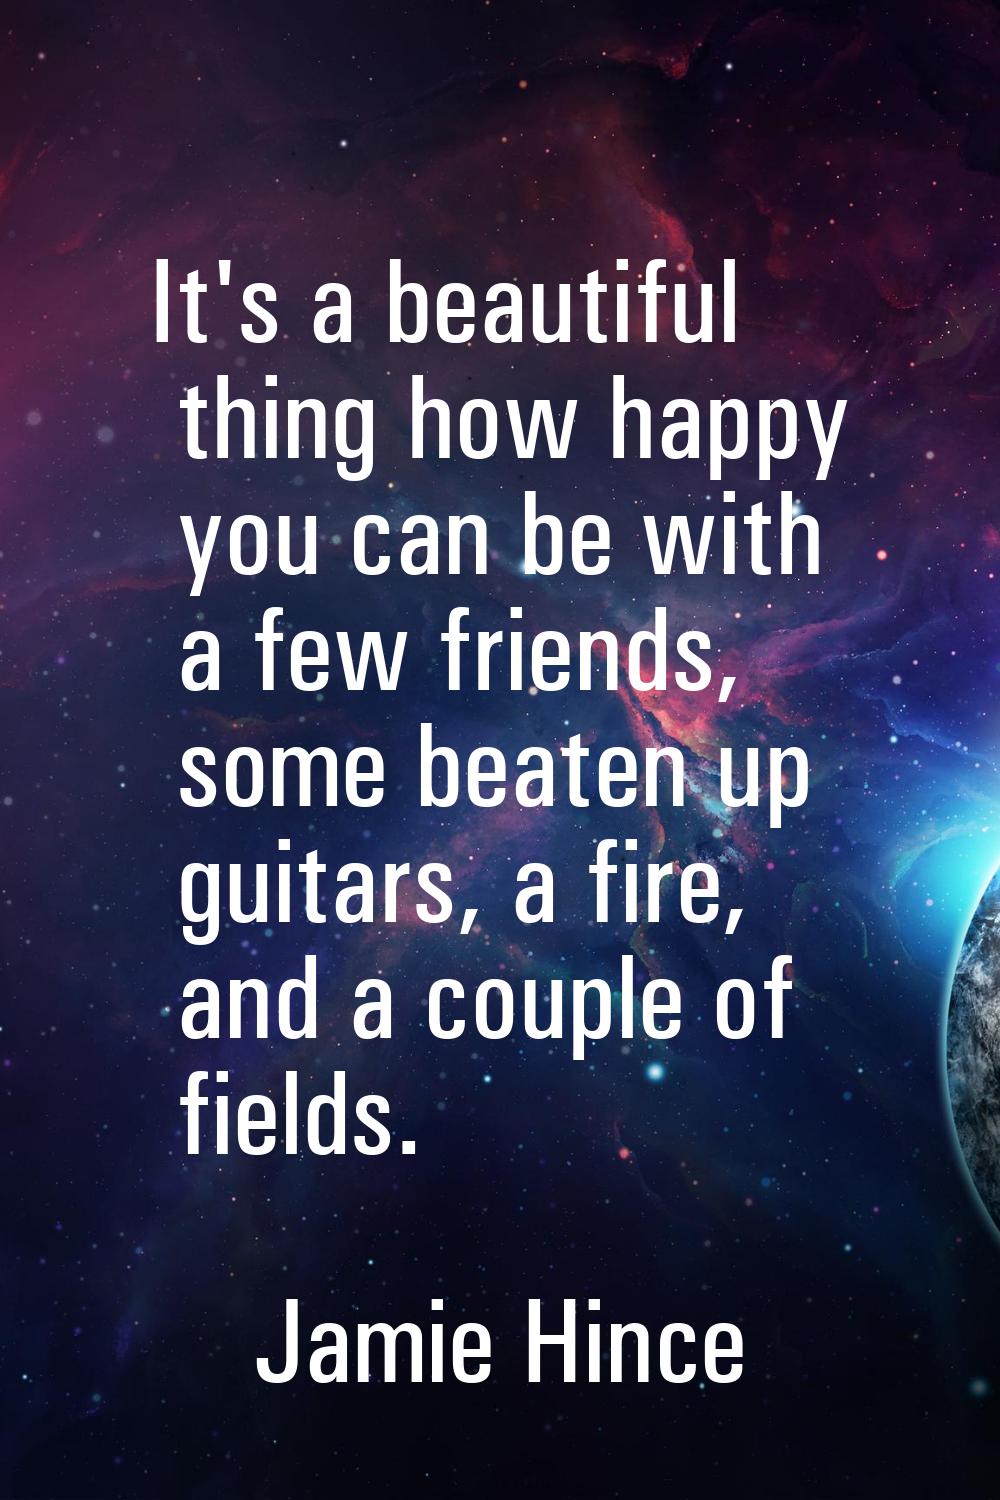 It's a beautiful thing how happy you can be with a few friends, some beaten up guitars, a fire, and